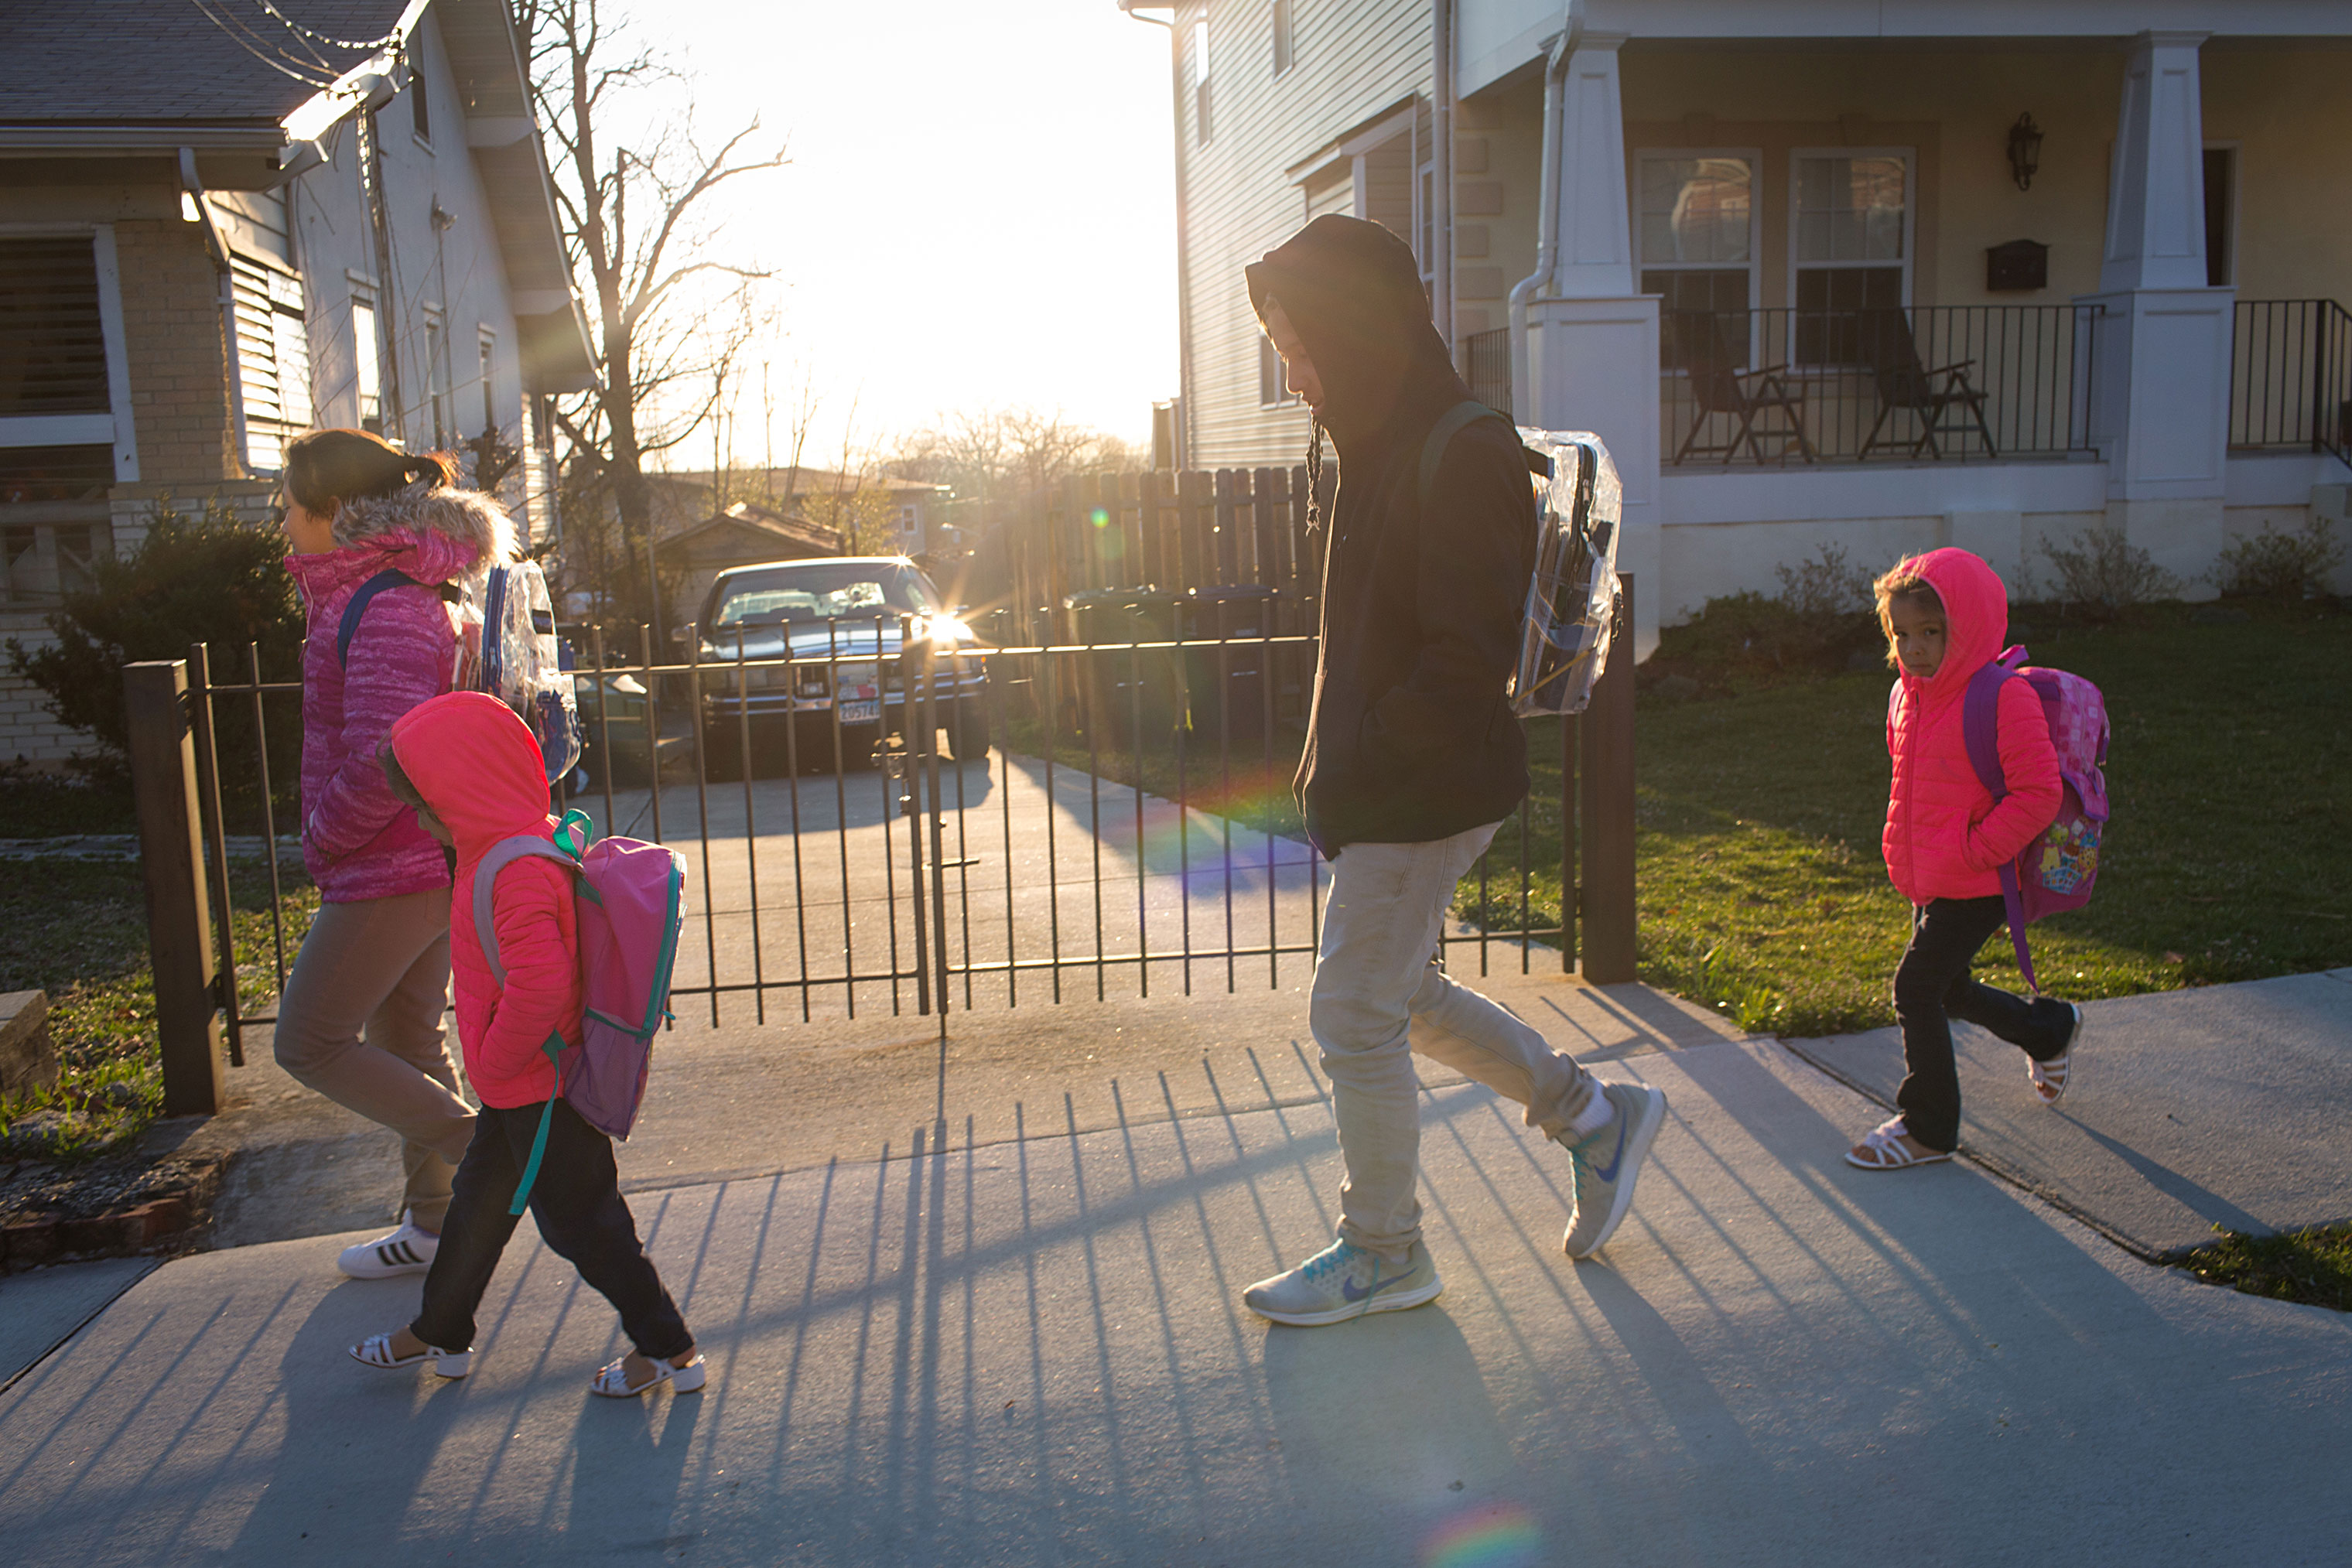 From left, Jeimy, 13, Sayra, 5, Victor, 15, and Cheyli, 5, walk to school on March 25. (Federica Valabrega)